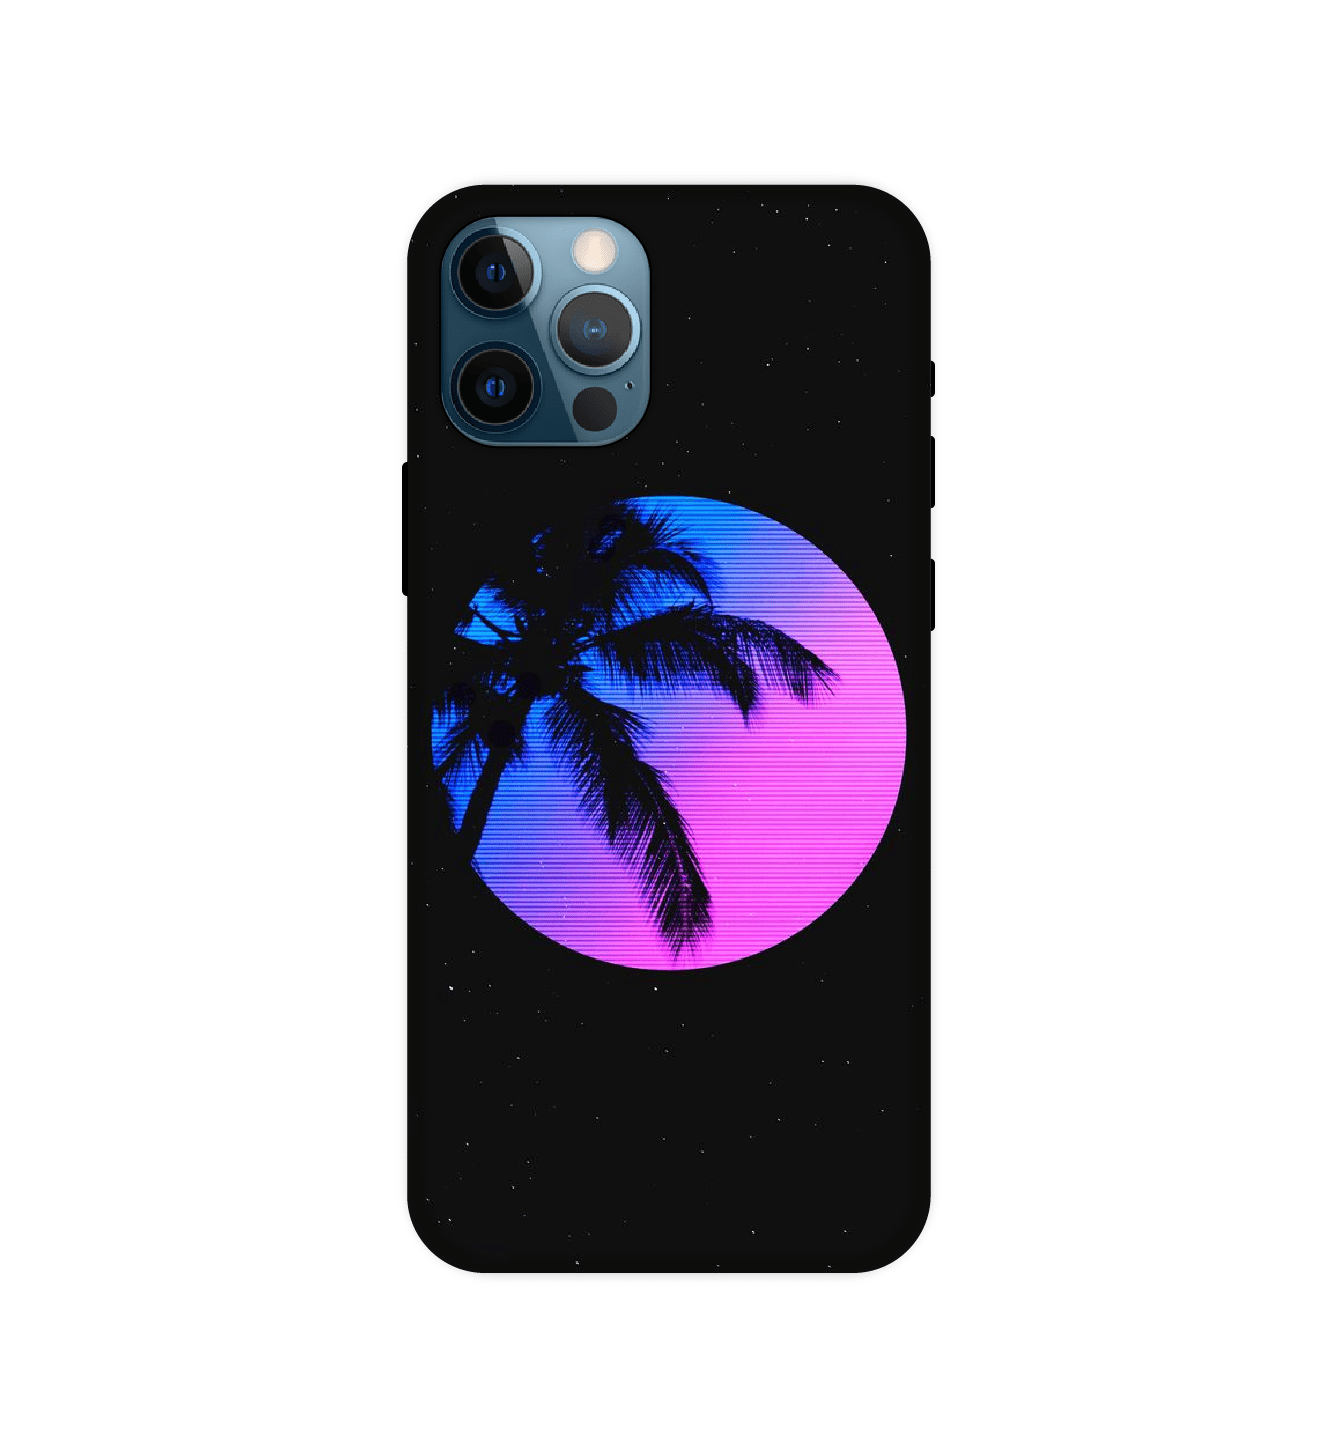 Night Terror Synthwave - Hard Cases For Apple iPhone Models